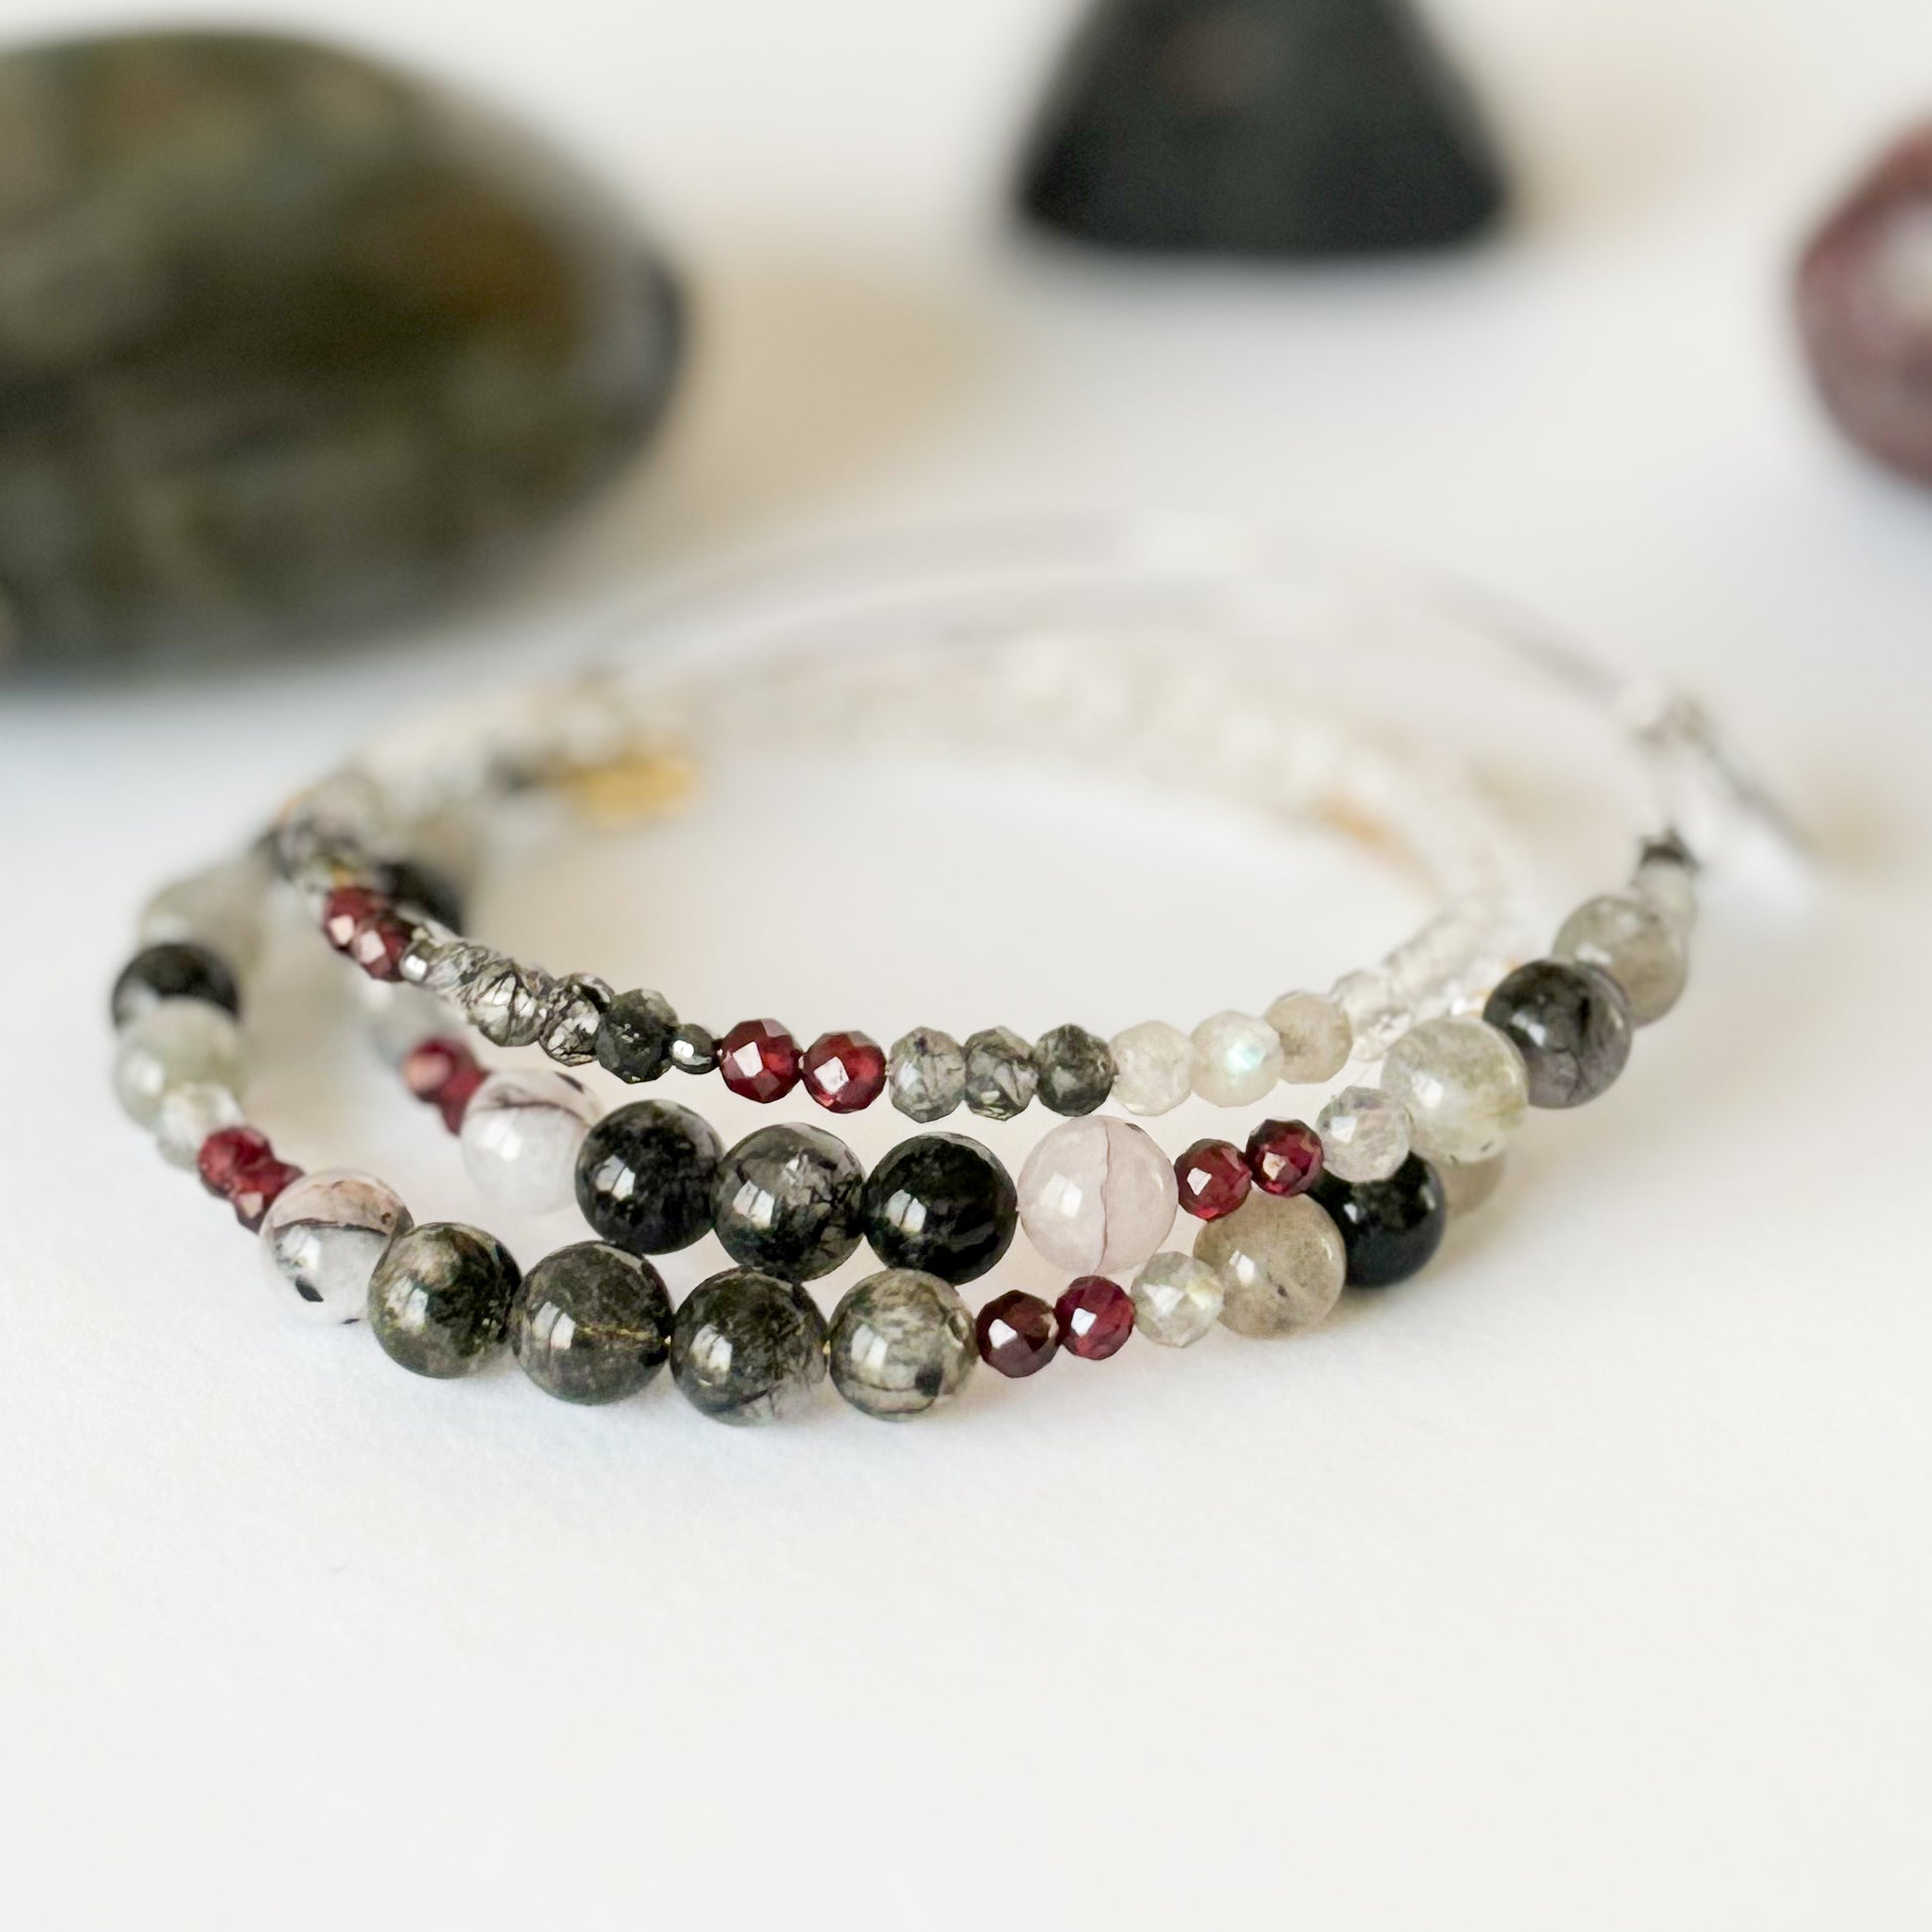 Bracelet with multi-colored healing crystals for grounding